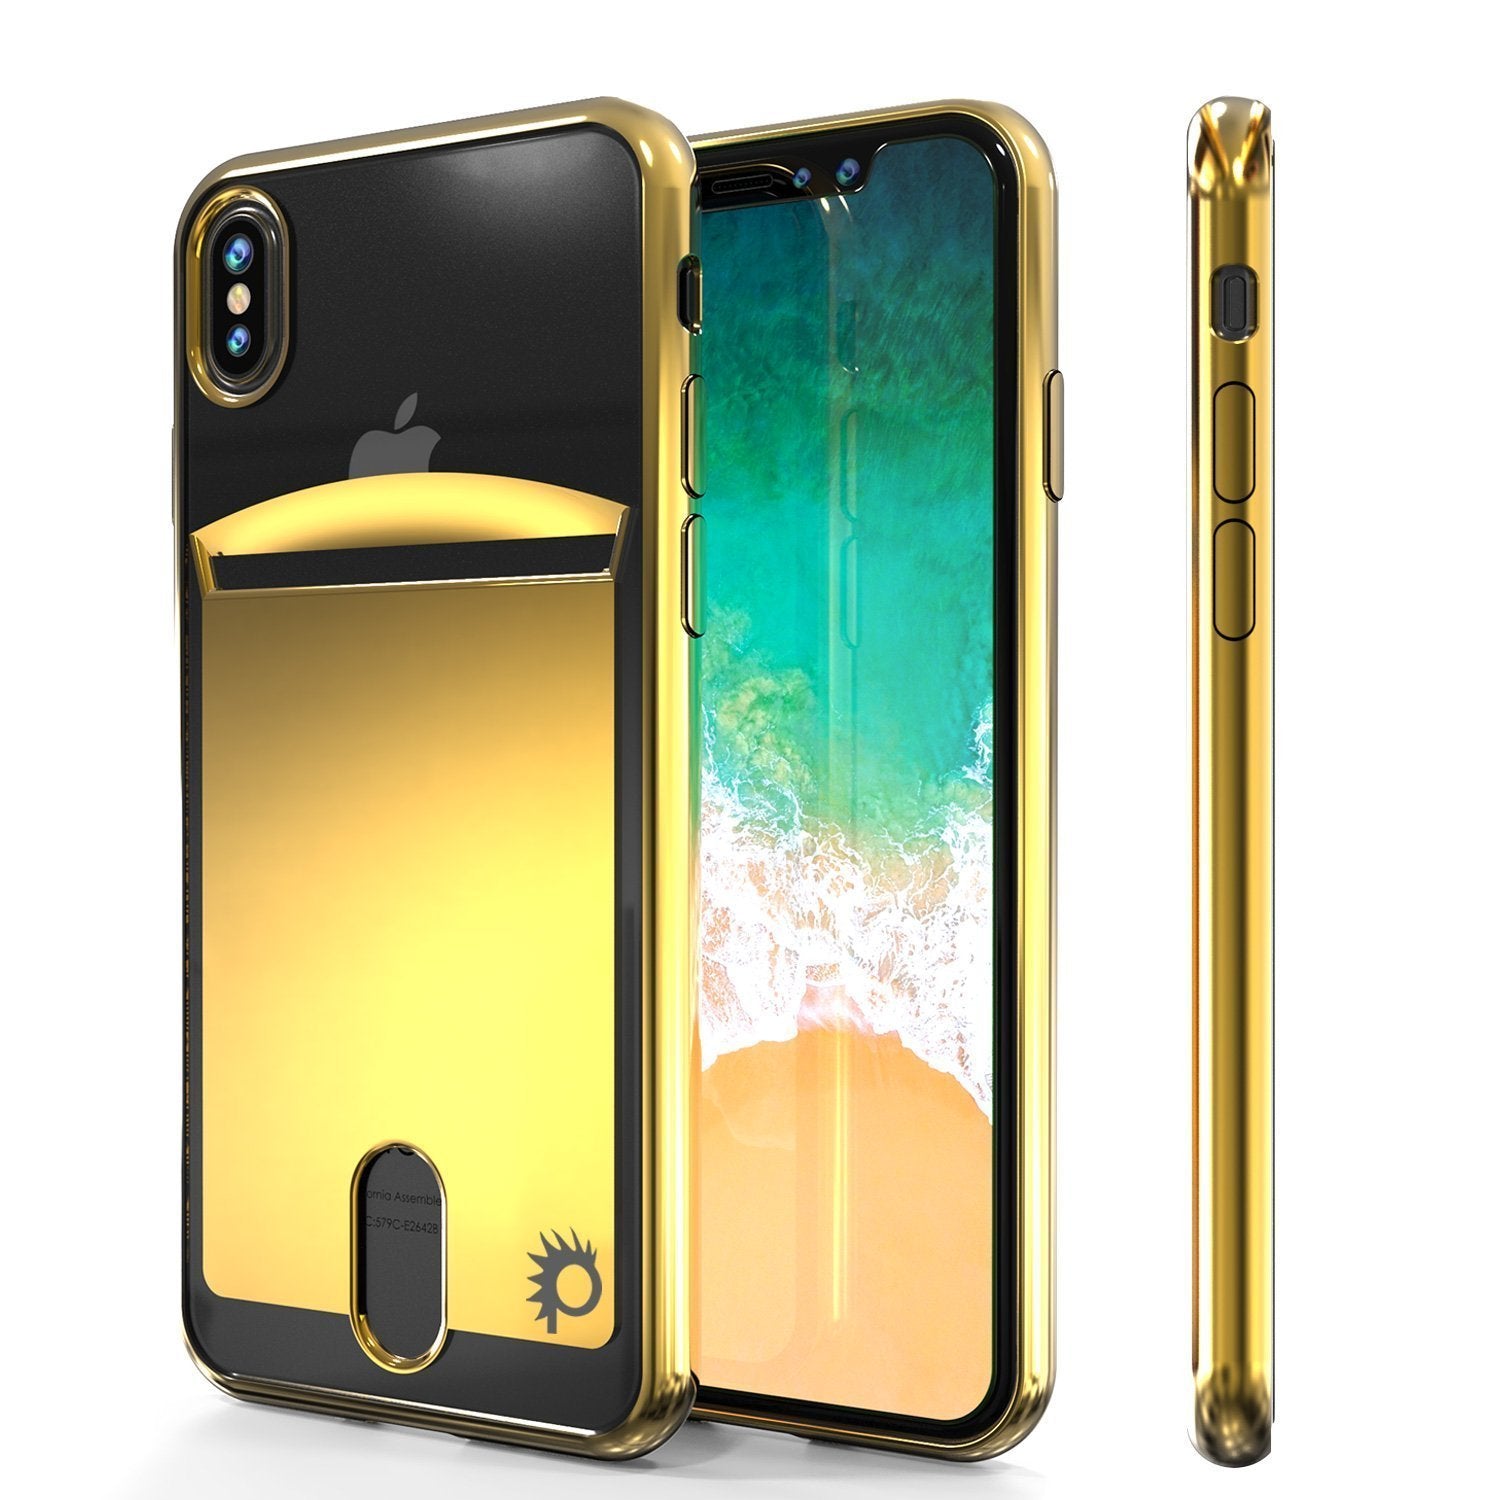 iPhone X Punkcase, LUCID Series Slim Fit Protective Dual Layer [Gold]